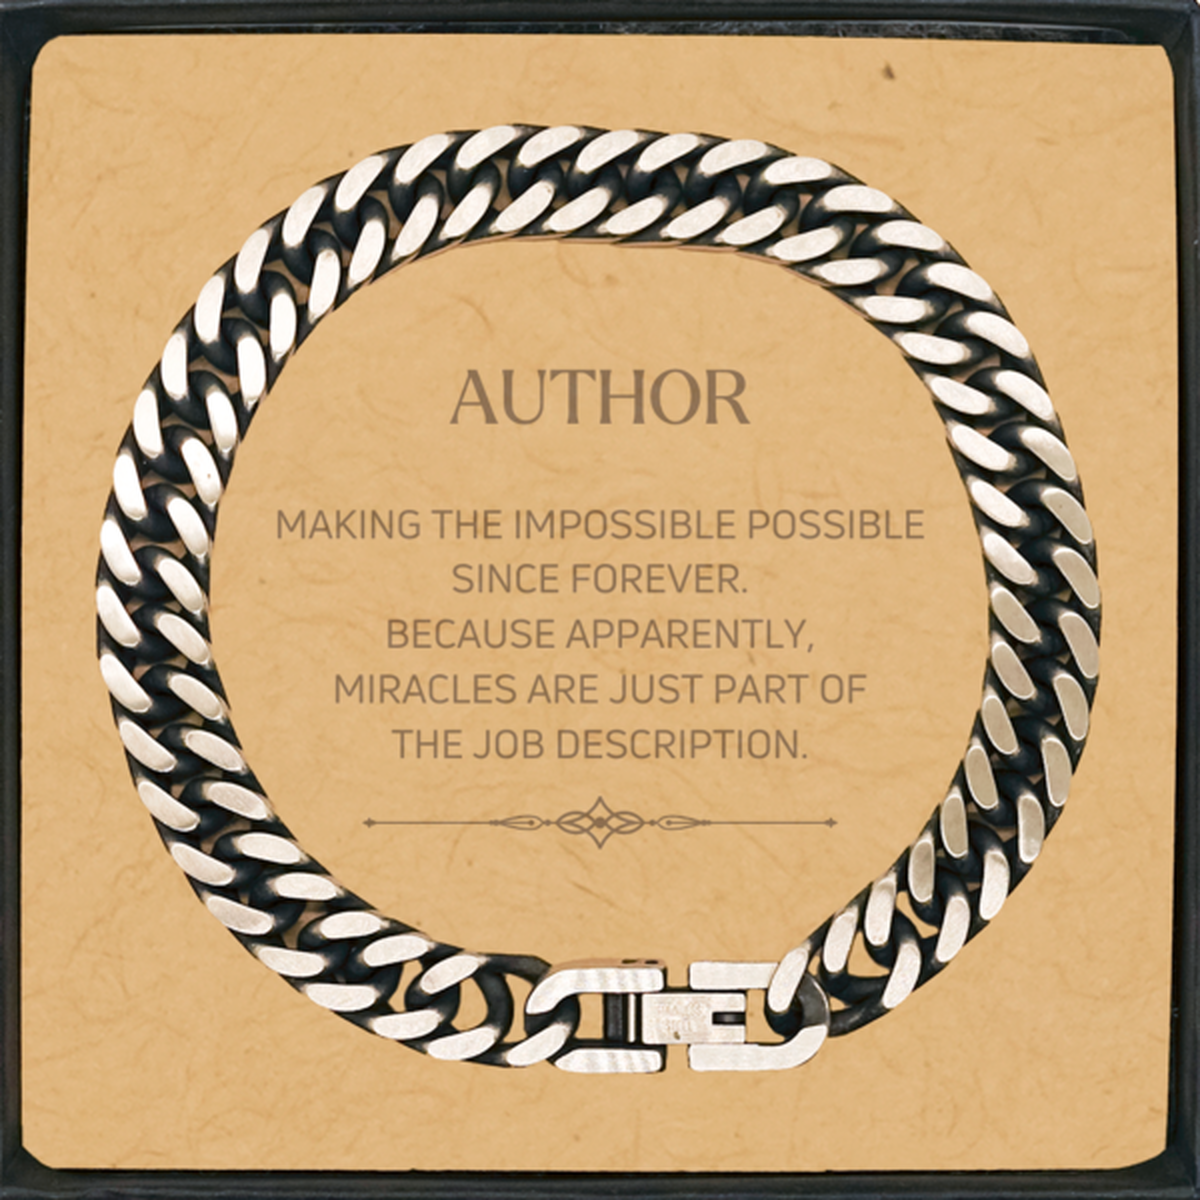 Funny Author Gifts, Miracles are just part of the job description, Inspirational Birthday Cuban Link Chain Bracelet For Author, Men, Women, Coworkers, Friends, Boss